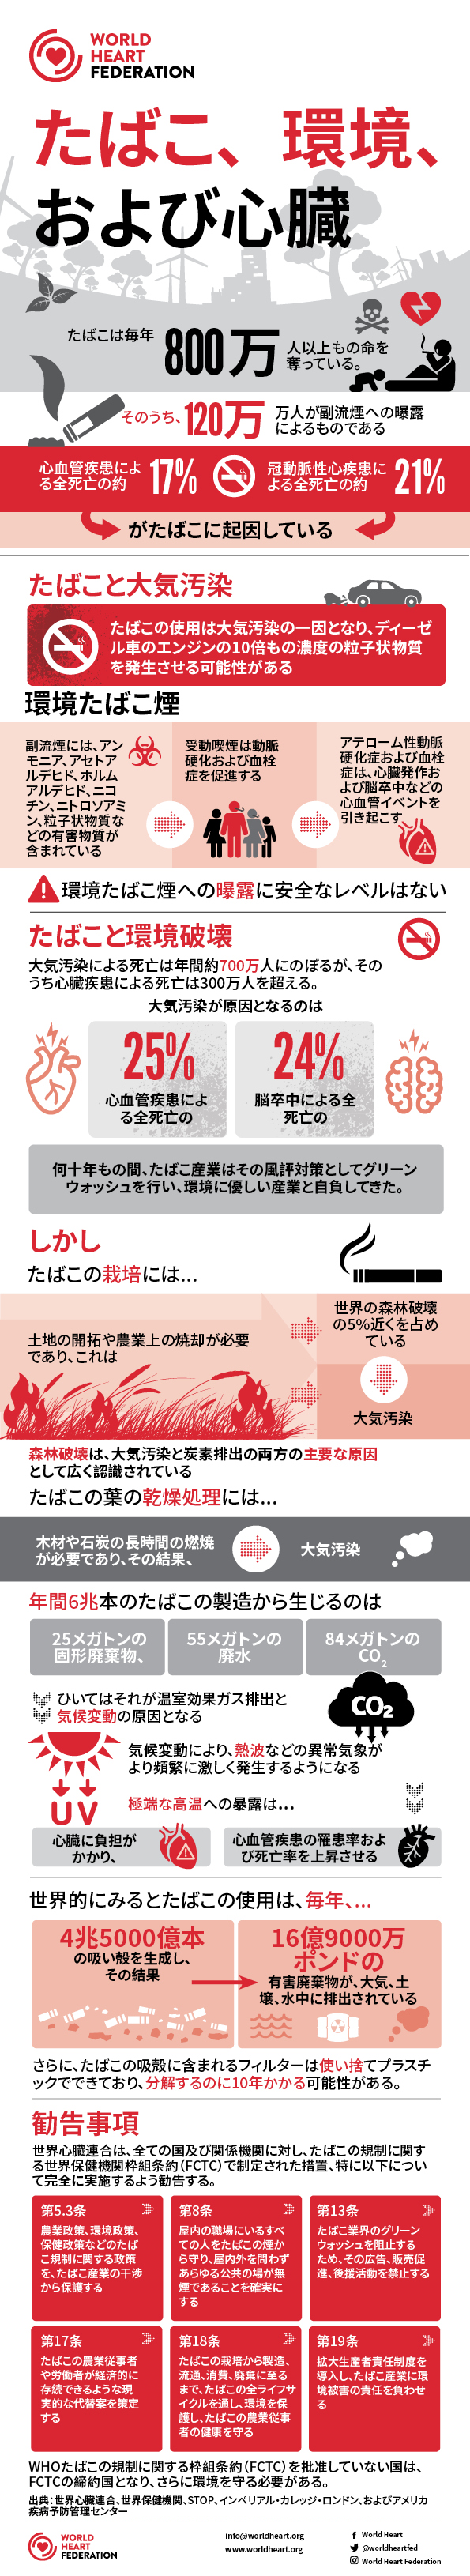 World Heart Federation Tobacco and the heart infographic in Japanese